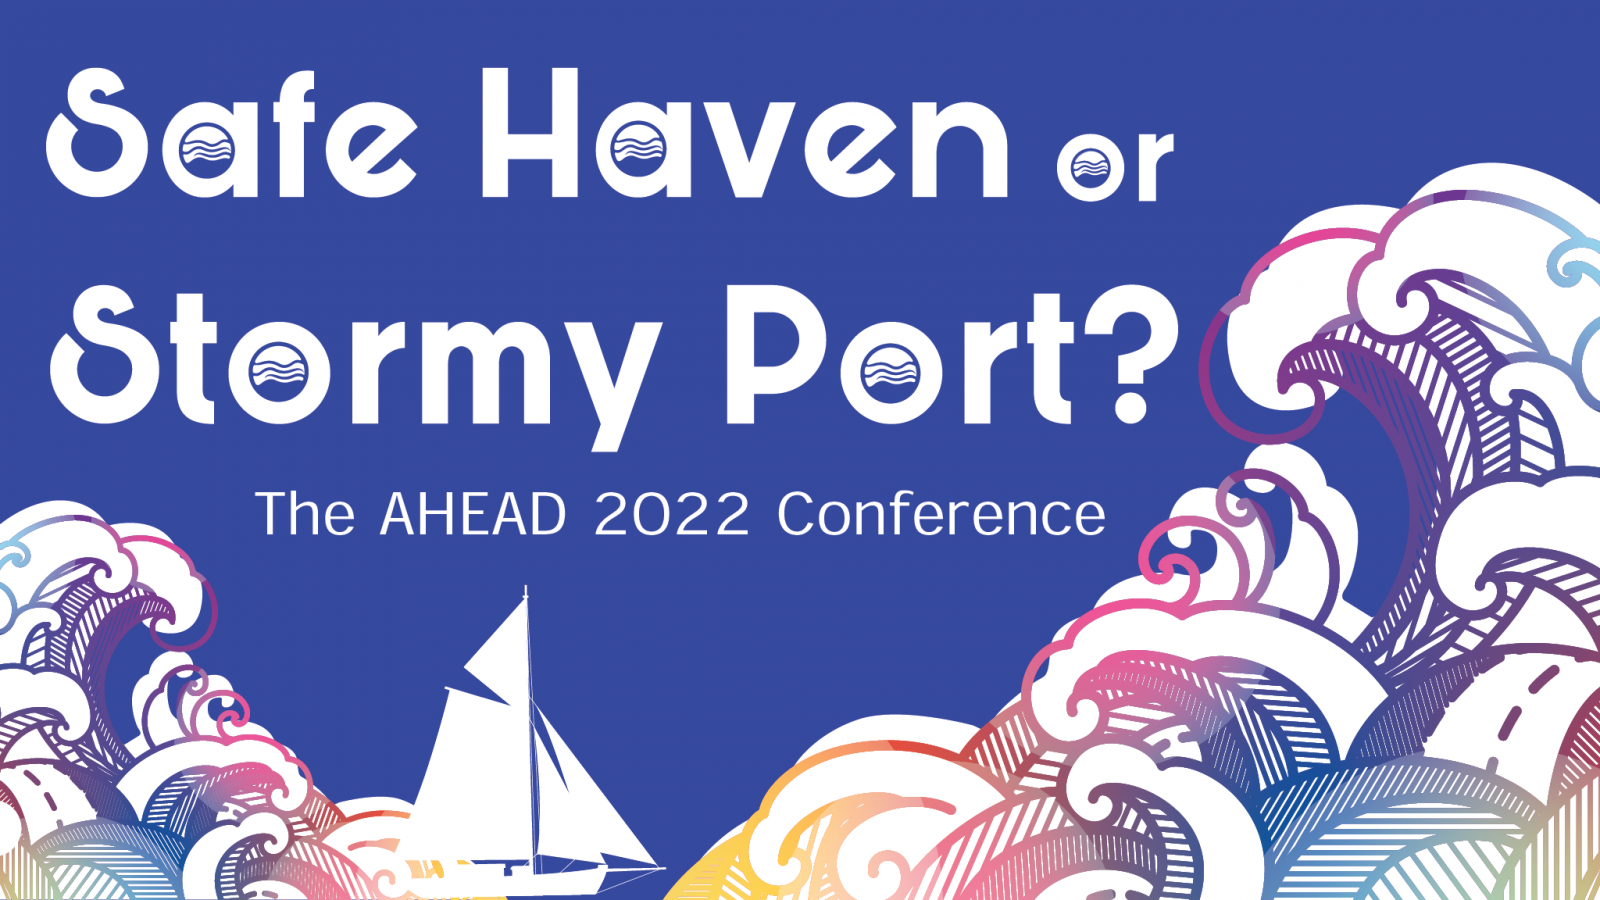 AHEAD Conference 2022 - Call for Submissions - Deadline Extended!